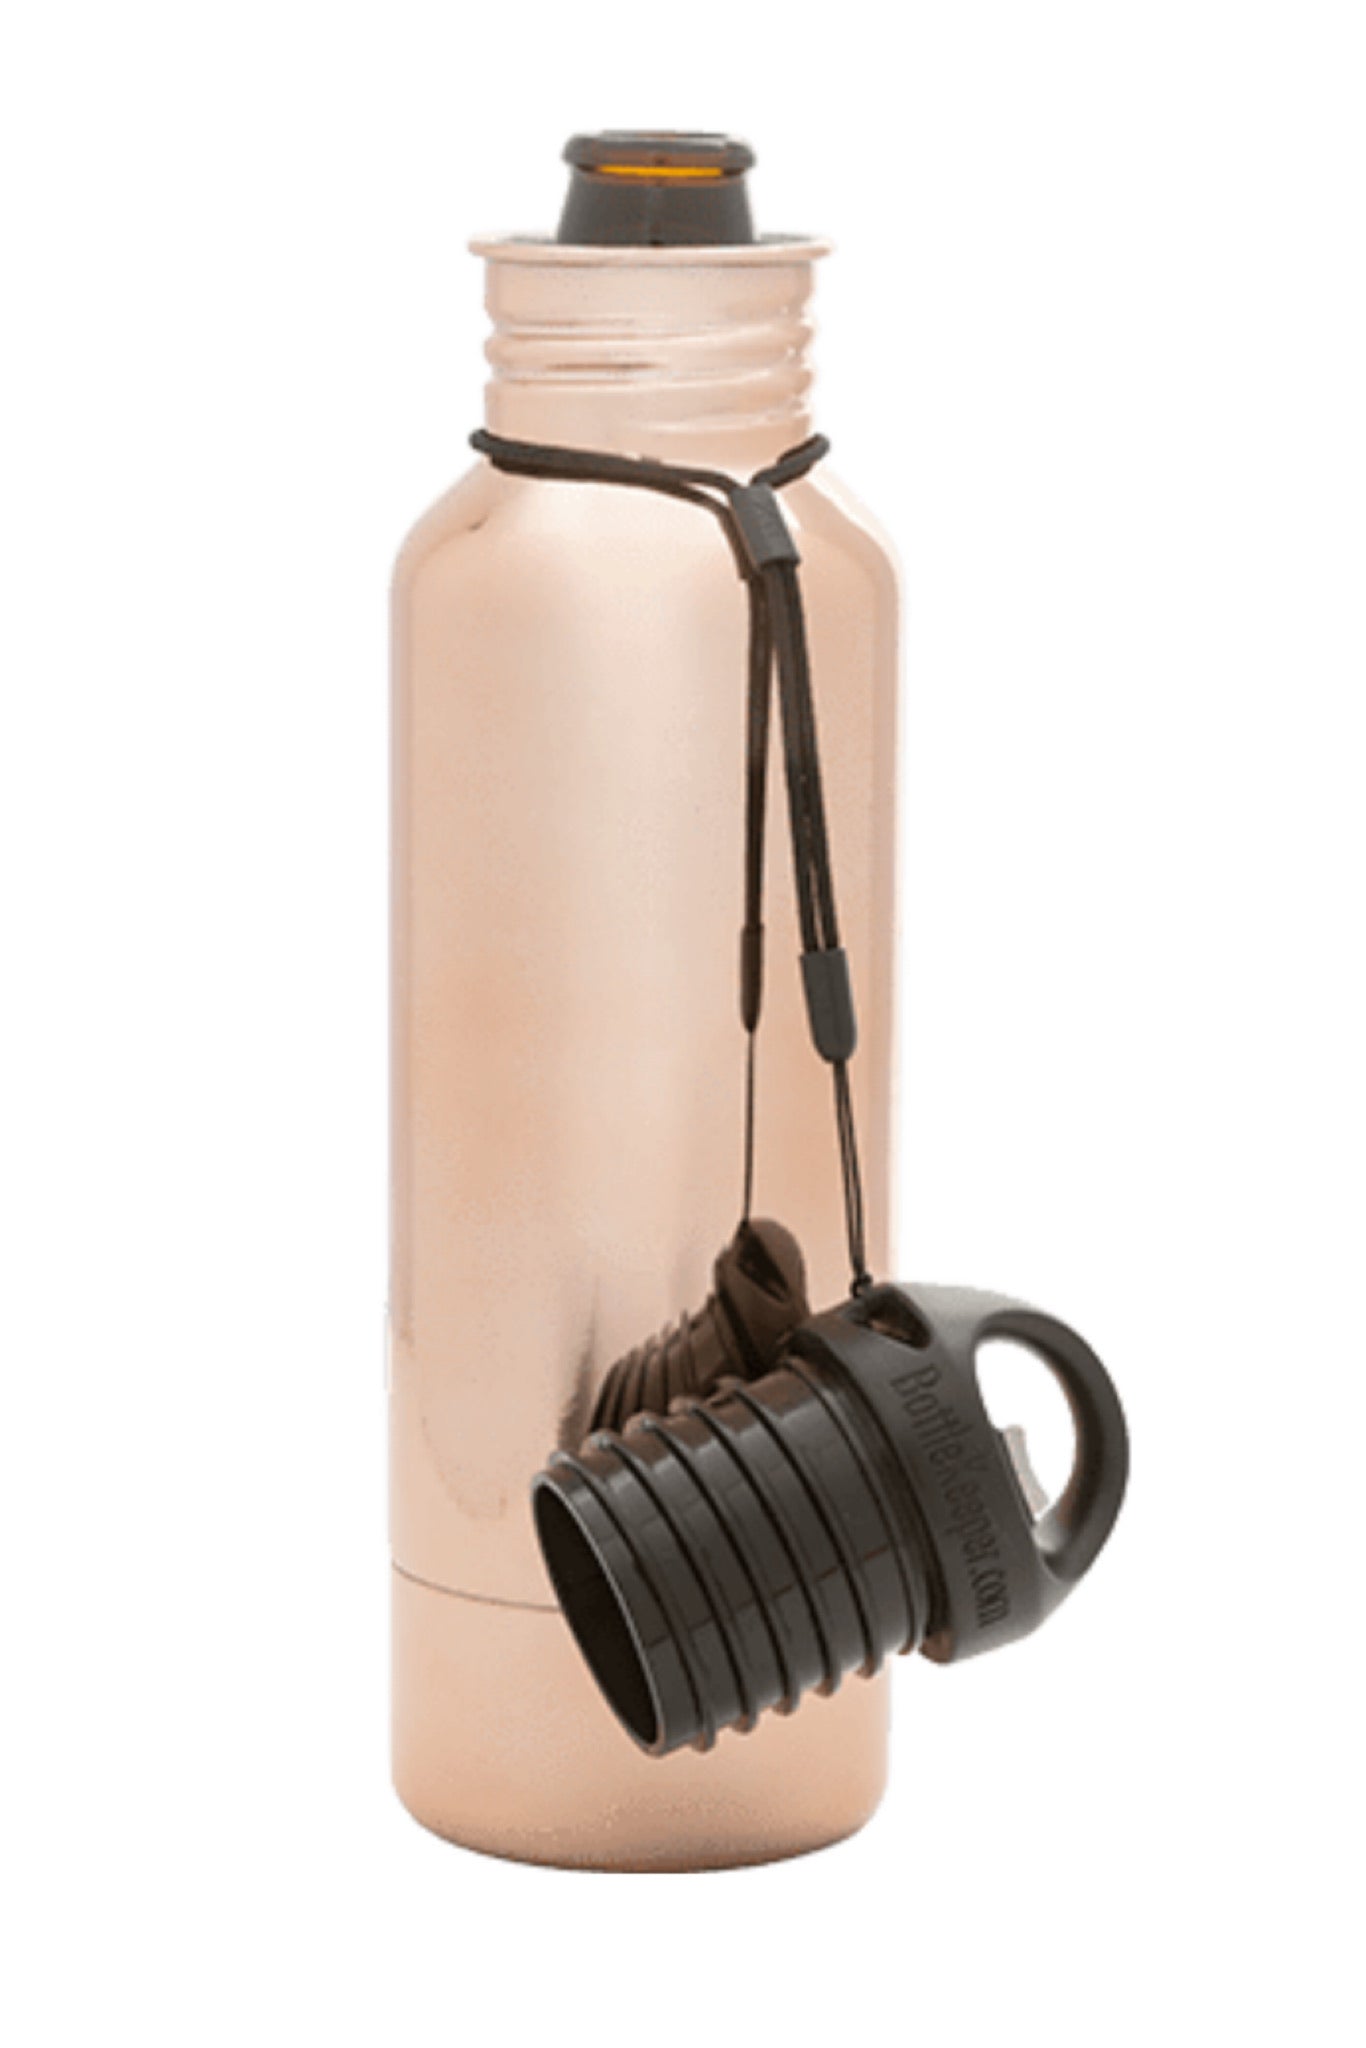 BottleKeeper - The Stubby 2.0 - The Original Stainless Steel Bottle Holder  and Insulator to Keep Your Beer Colder (Black)